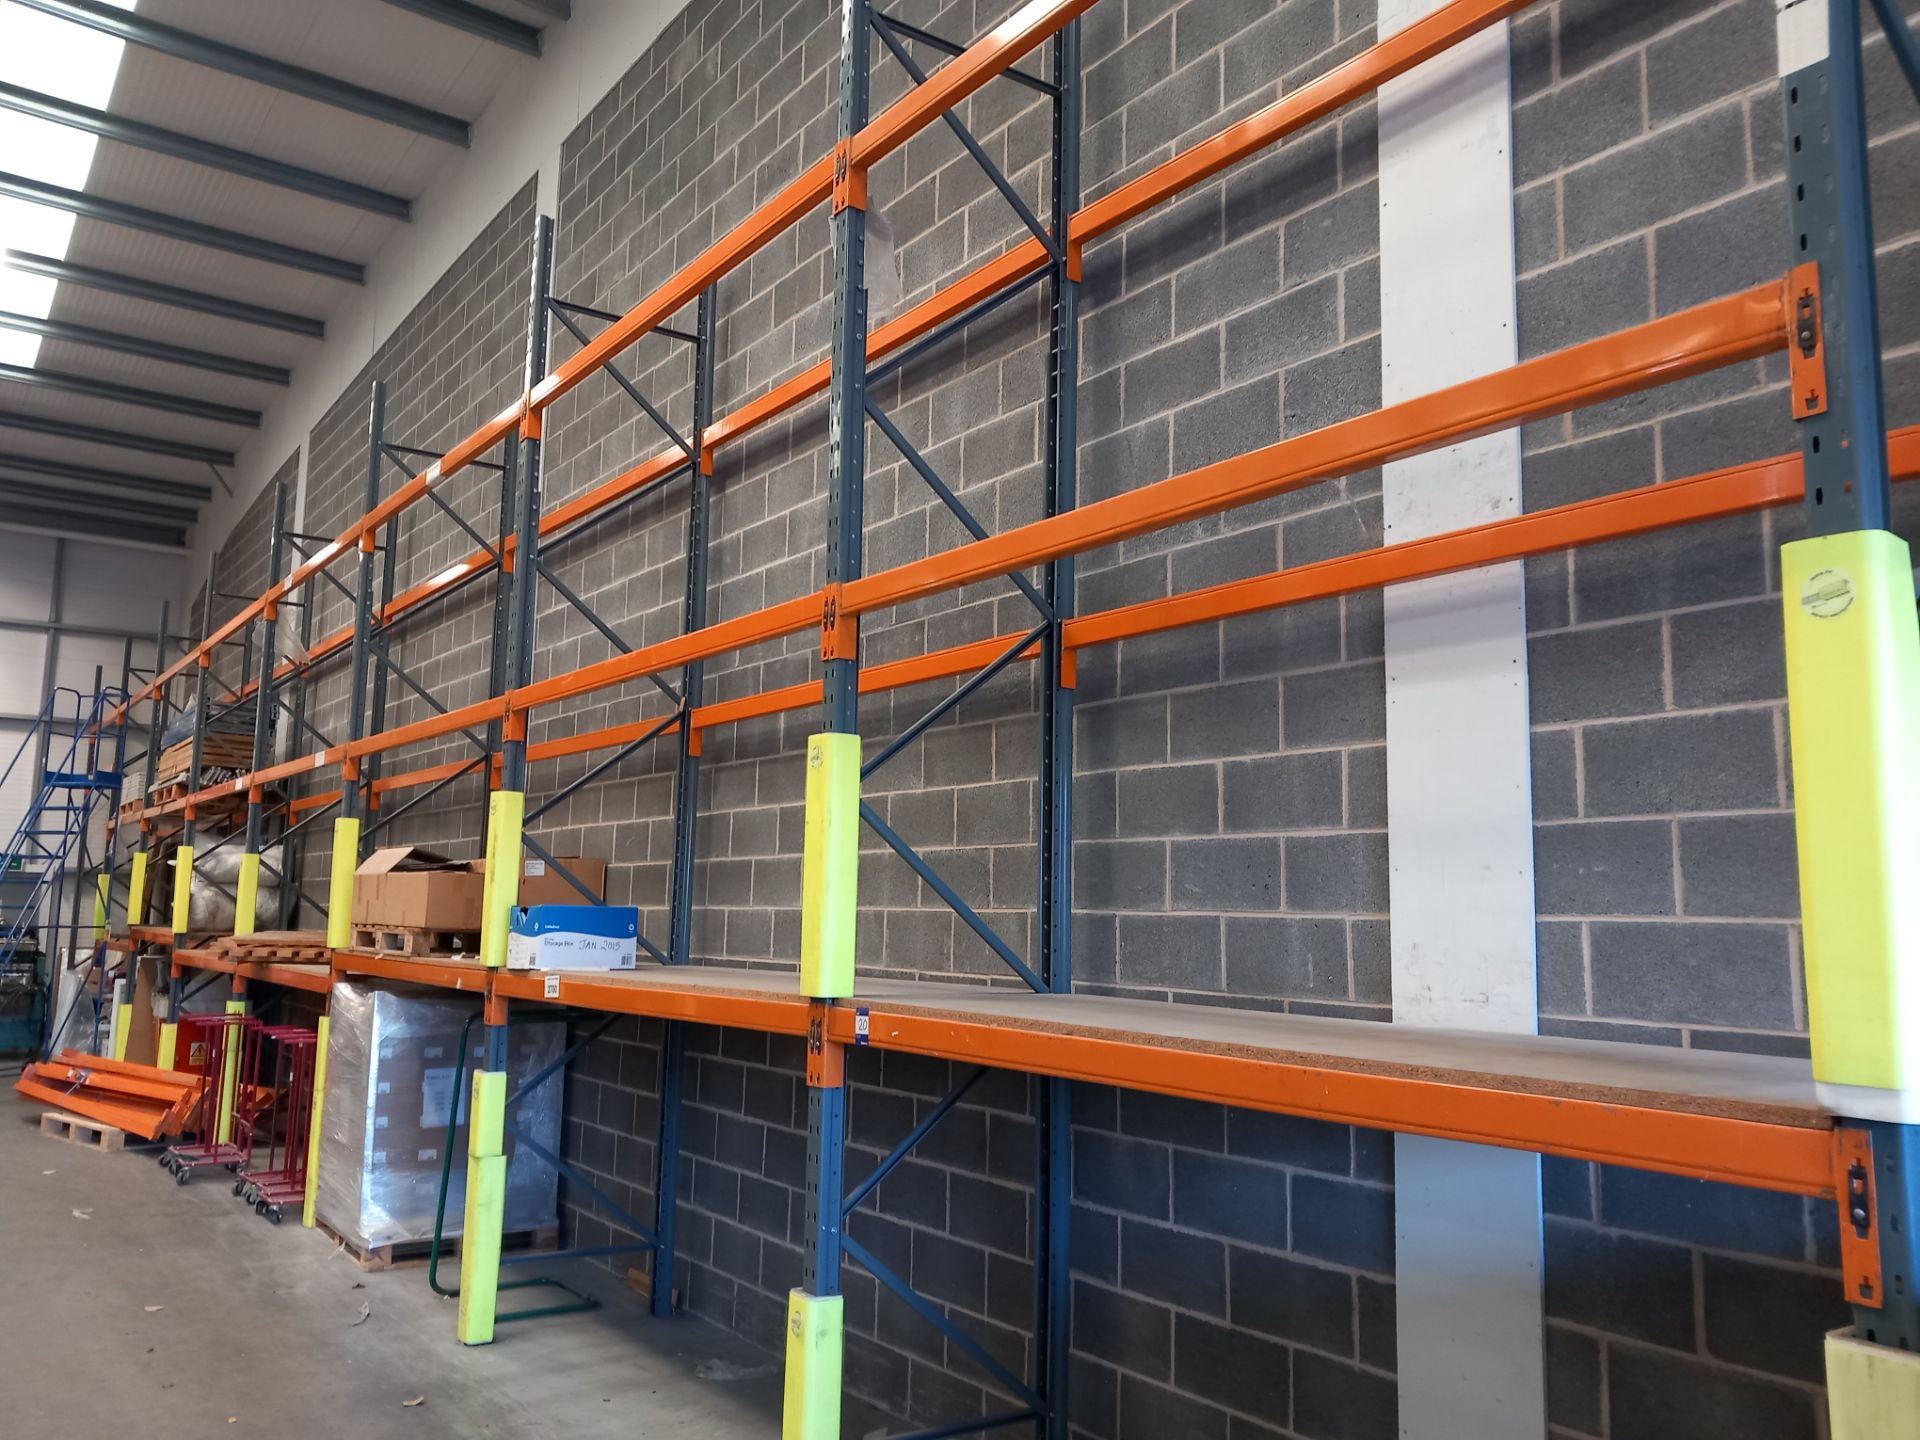 16 Bays of Dexion Speedlock boltless steel pallet racking with spare beams & guard railing & shelf - Image 2 of 9